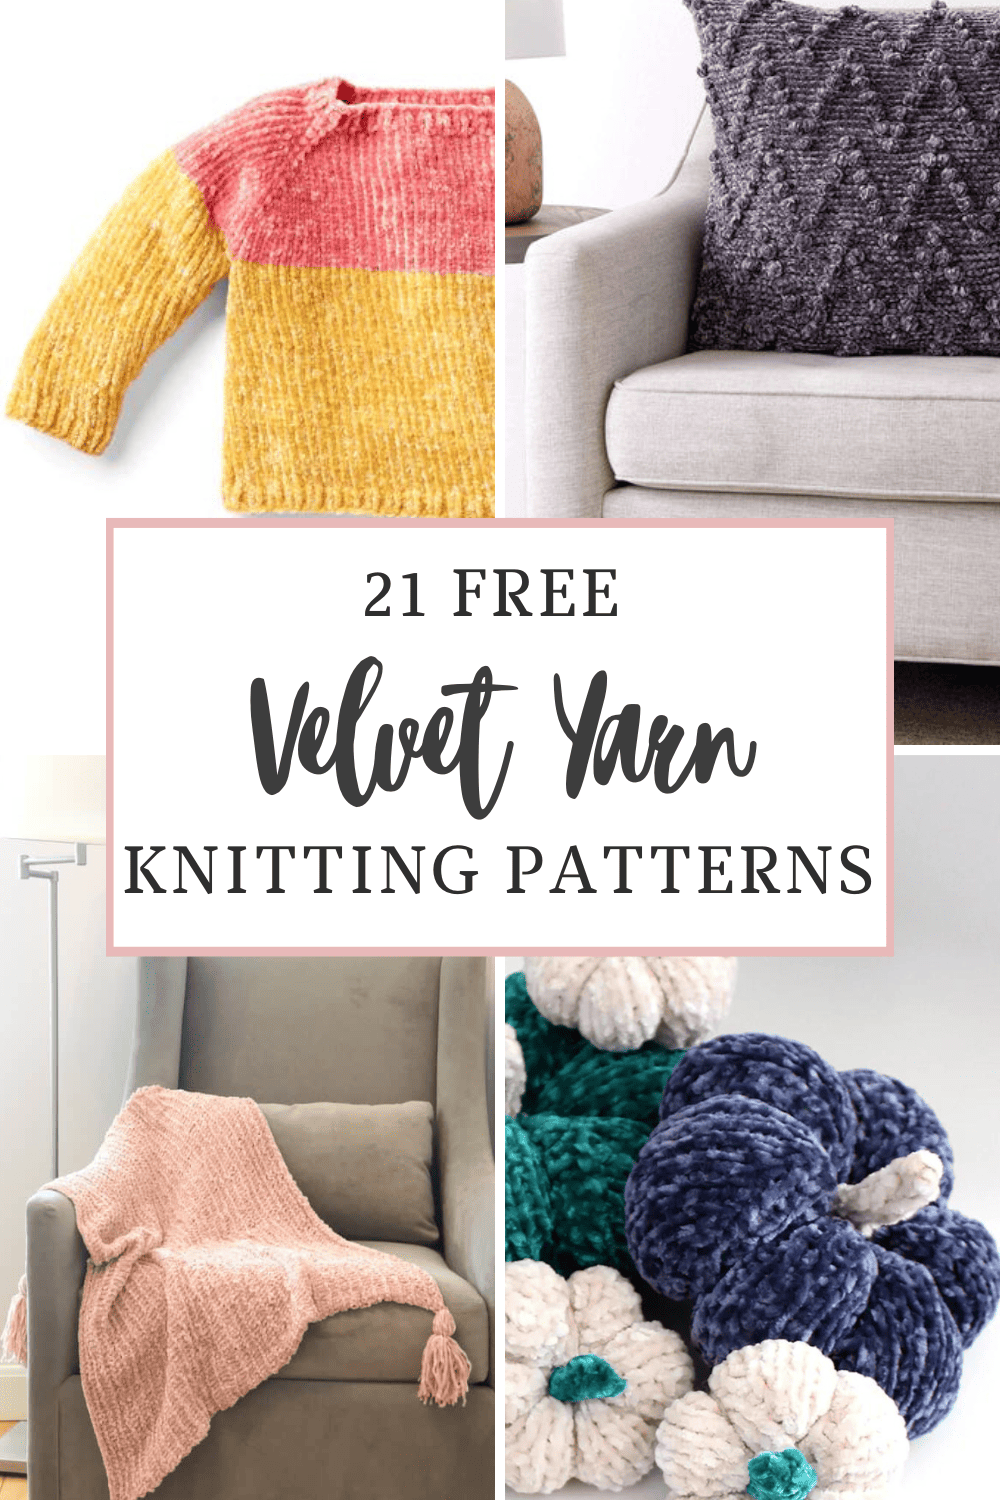 Free Knitting Pattern for a Cowl Neck Cabled Sweater - Knitting Bee